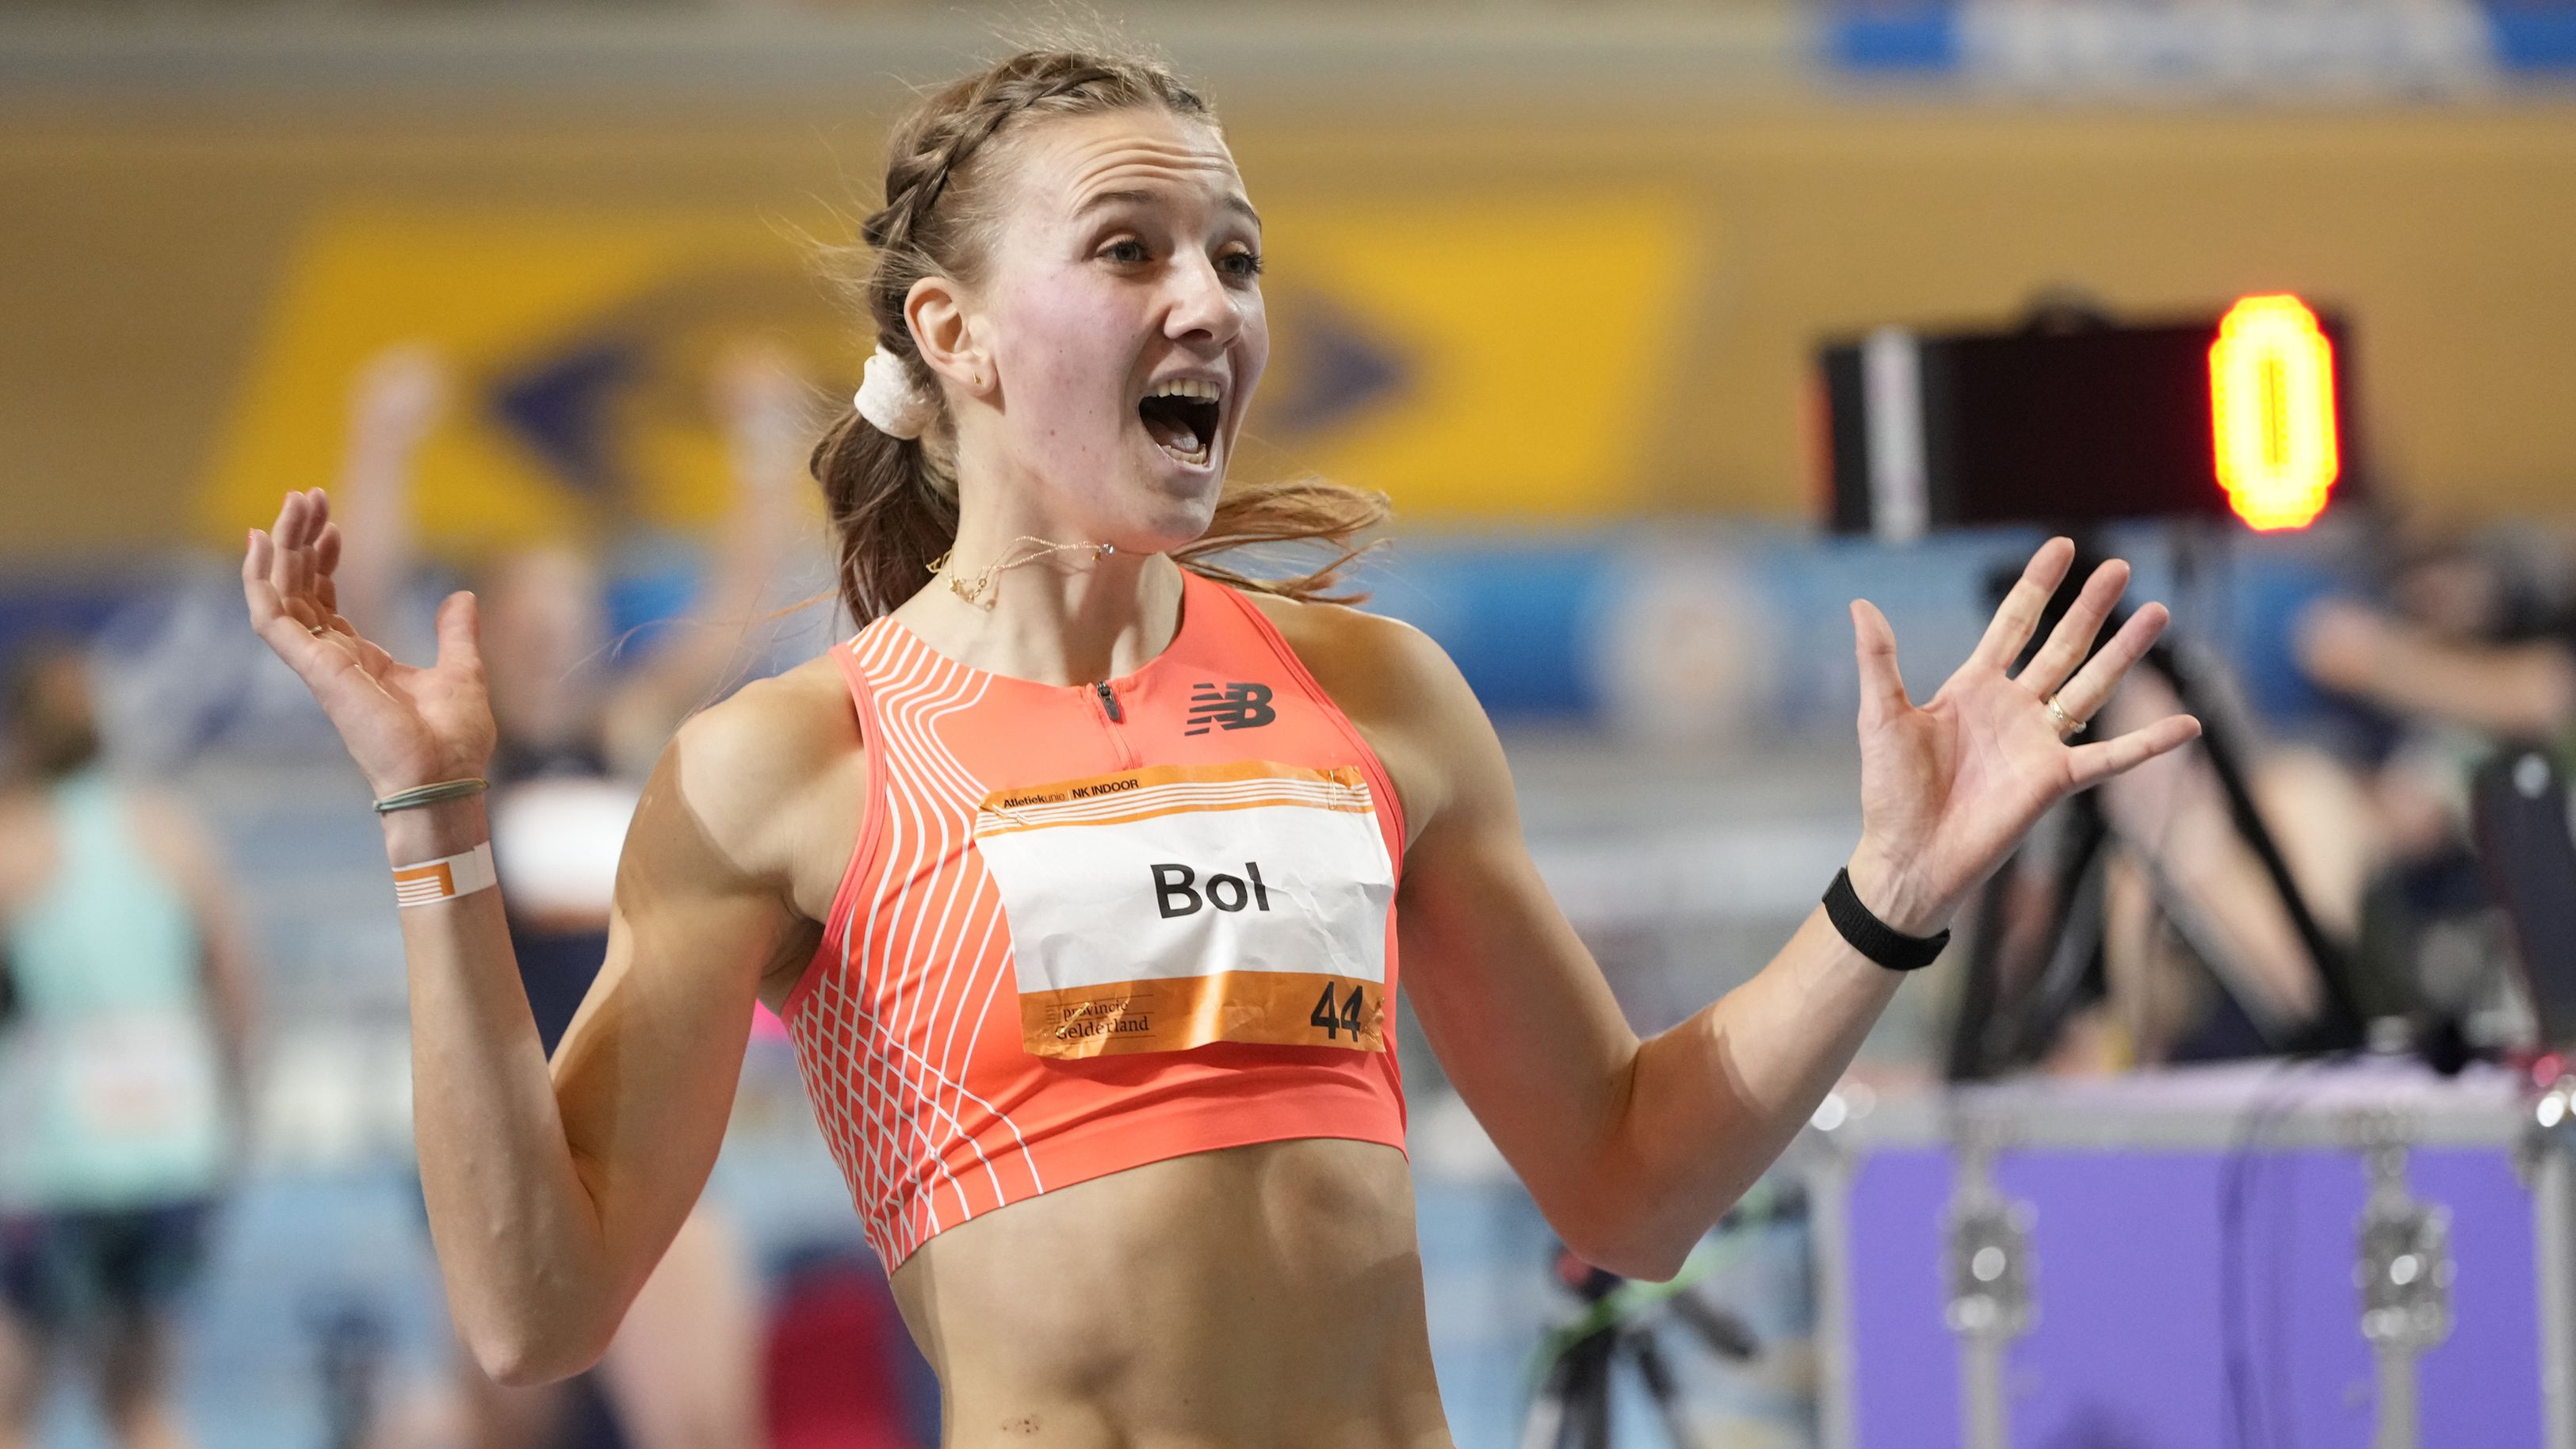 Femke Bol shatters 41-year-old world record at Dutch Indoor Championships